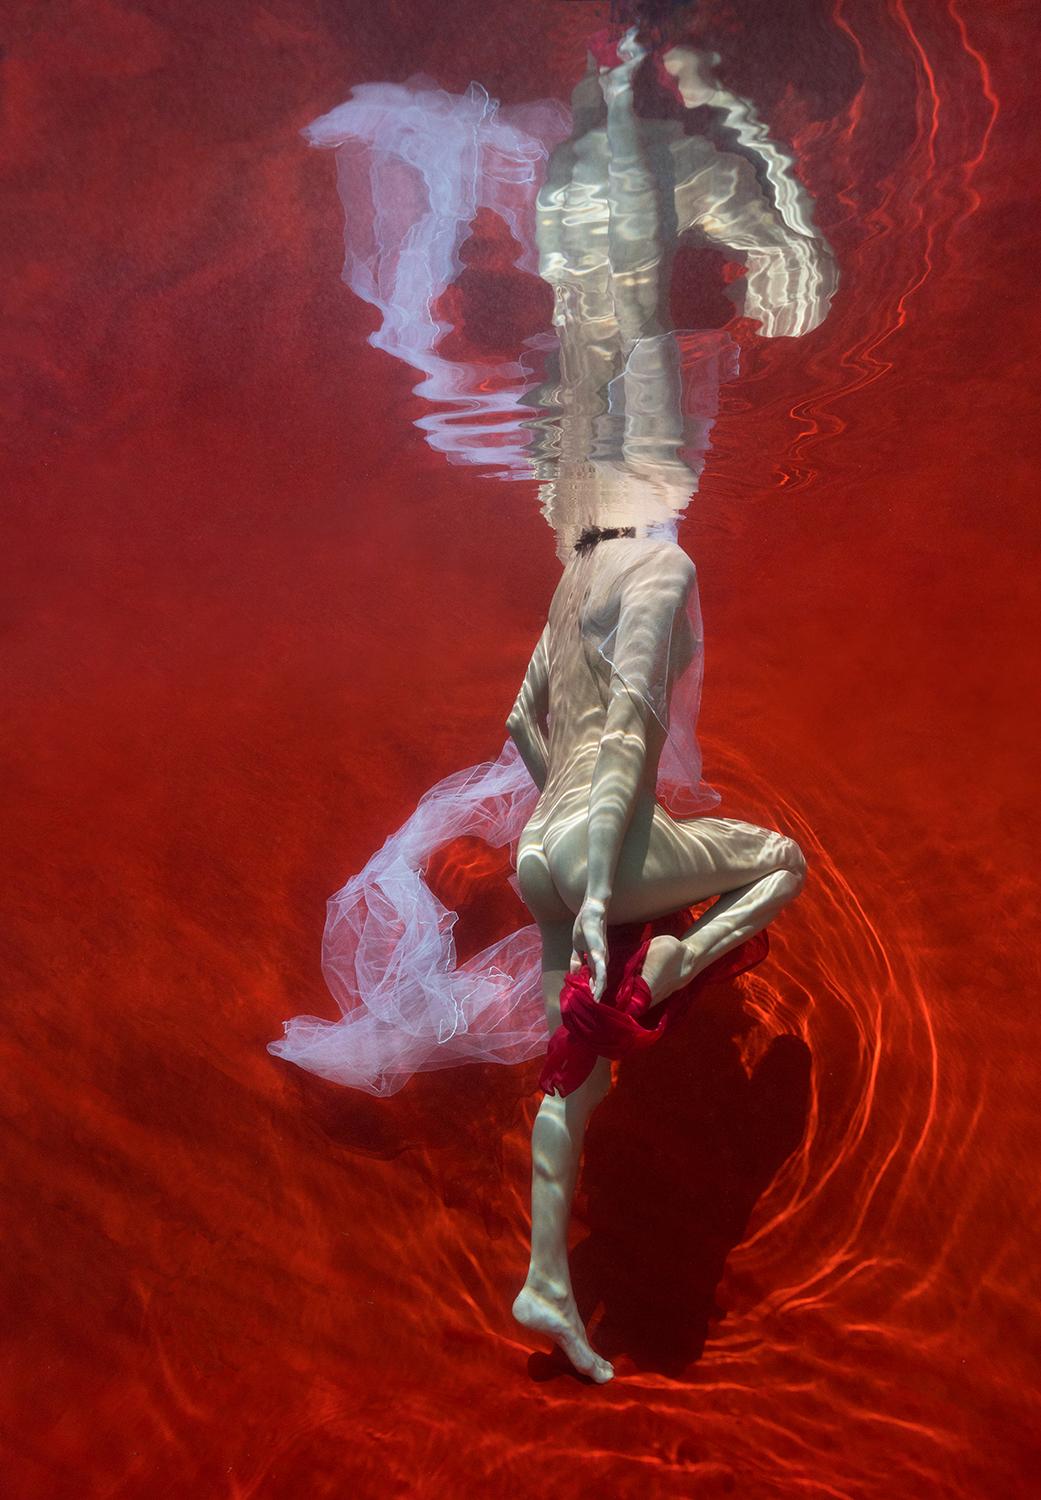 Blood and Milk VII  - underwater nude photograph, archival print on paper 16x23"